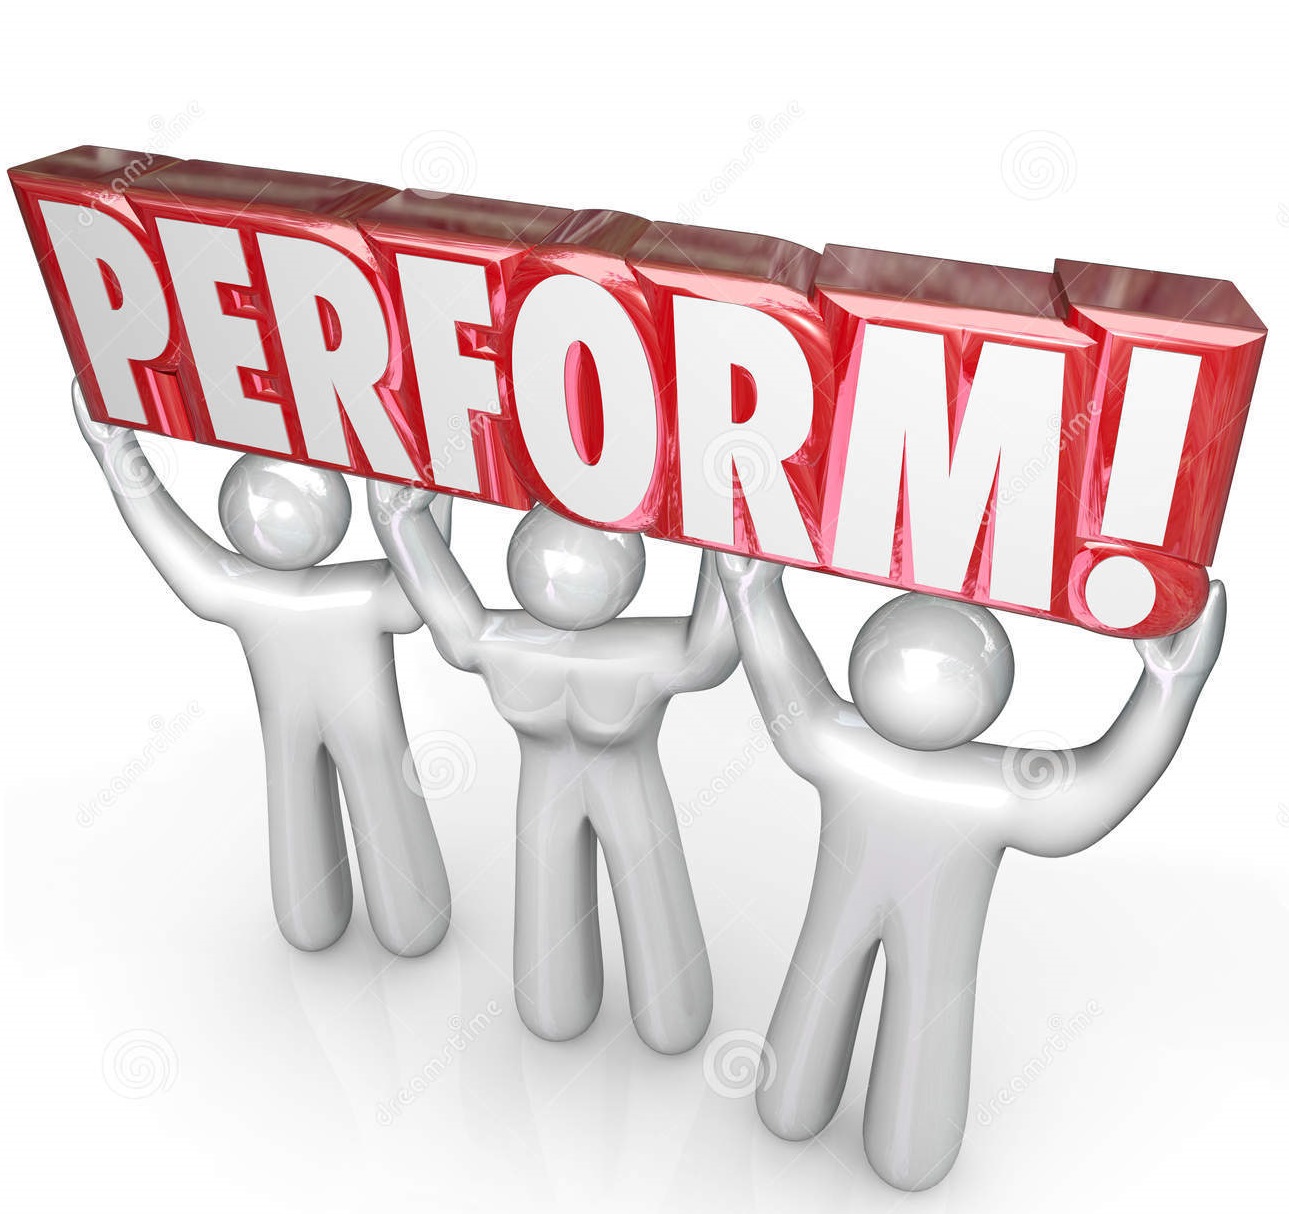 perform-people-lifting-words-take-action-implement-job-task-word-lifted-three-team-to-illustrate-performance-36679225